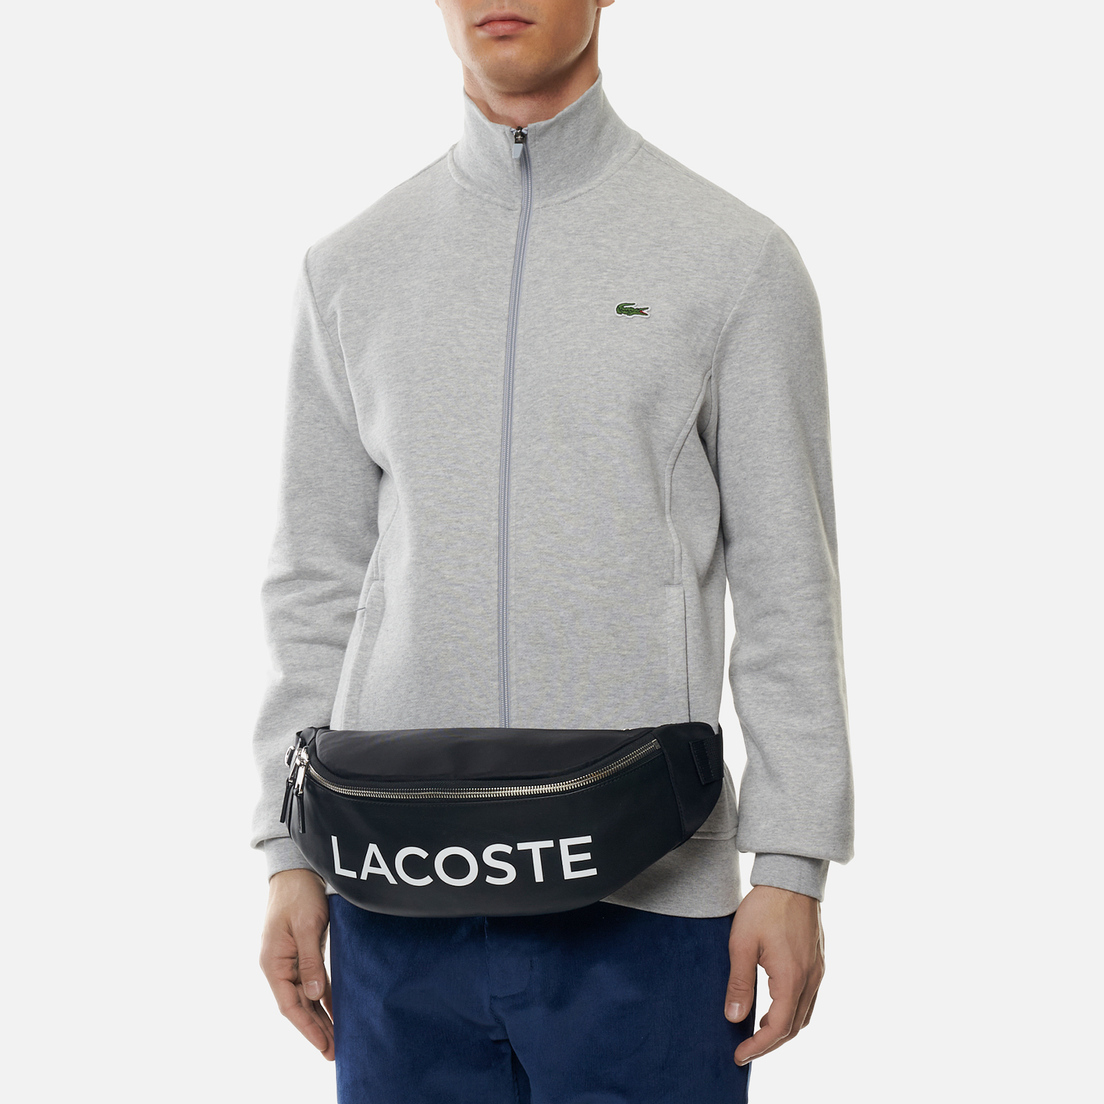 Lacoste Сумка на пояс L.12.12 Branded Smooth Leather